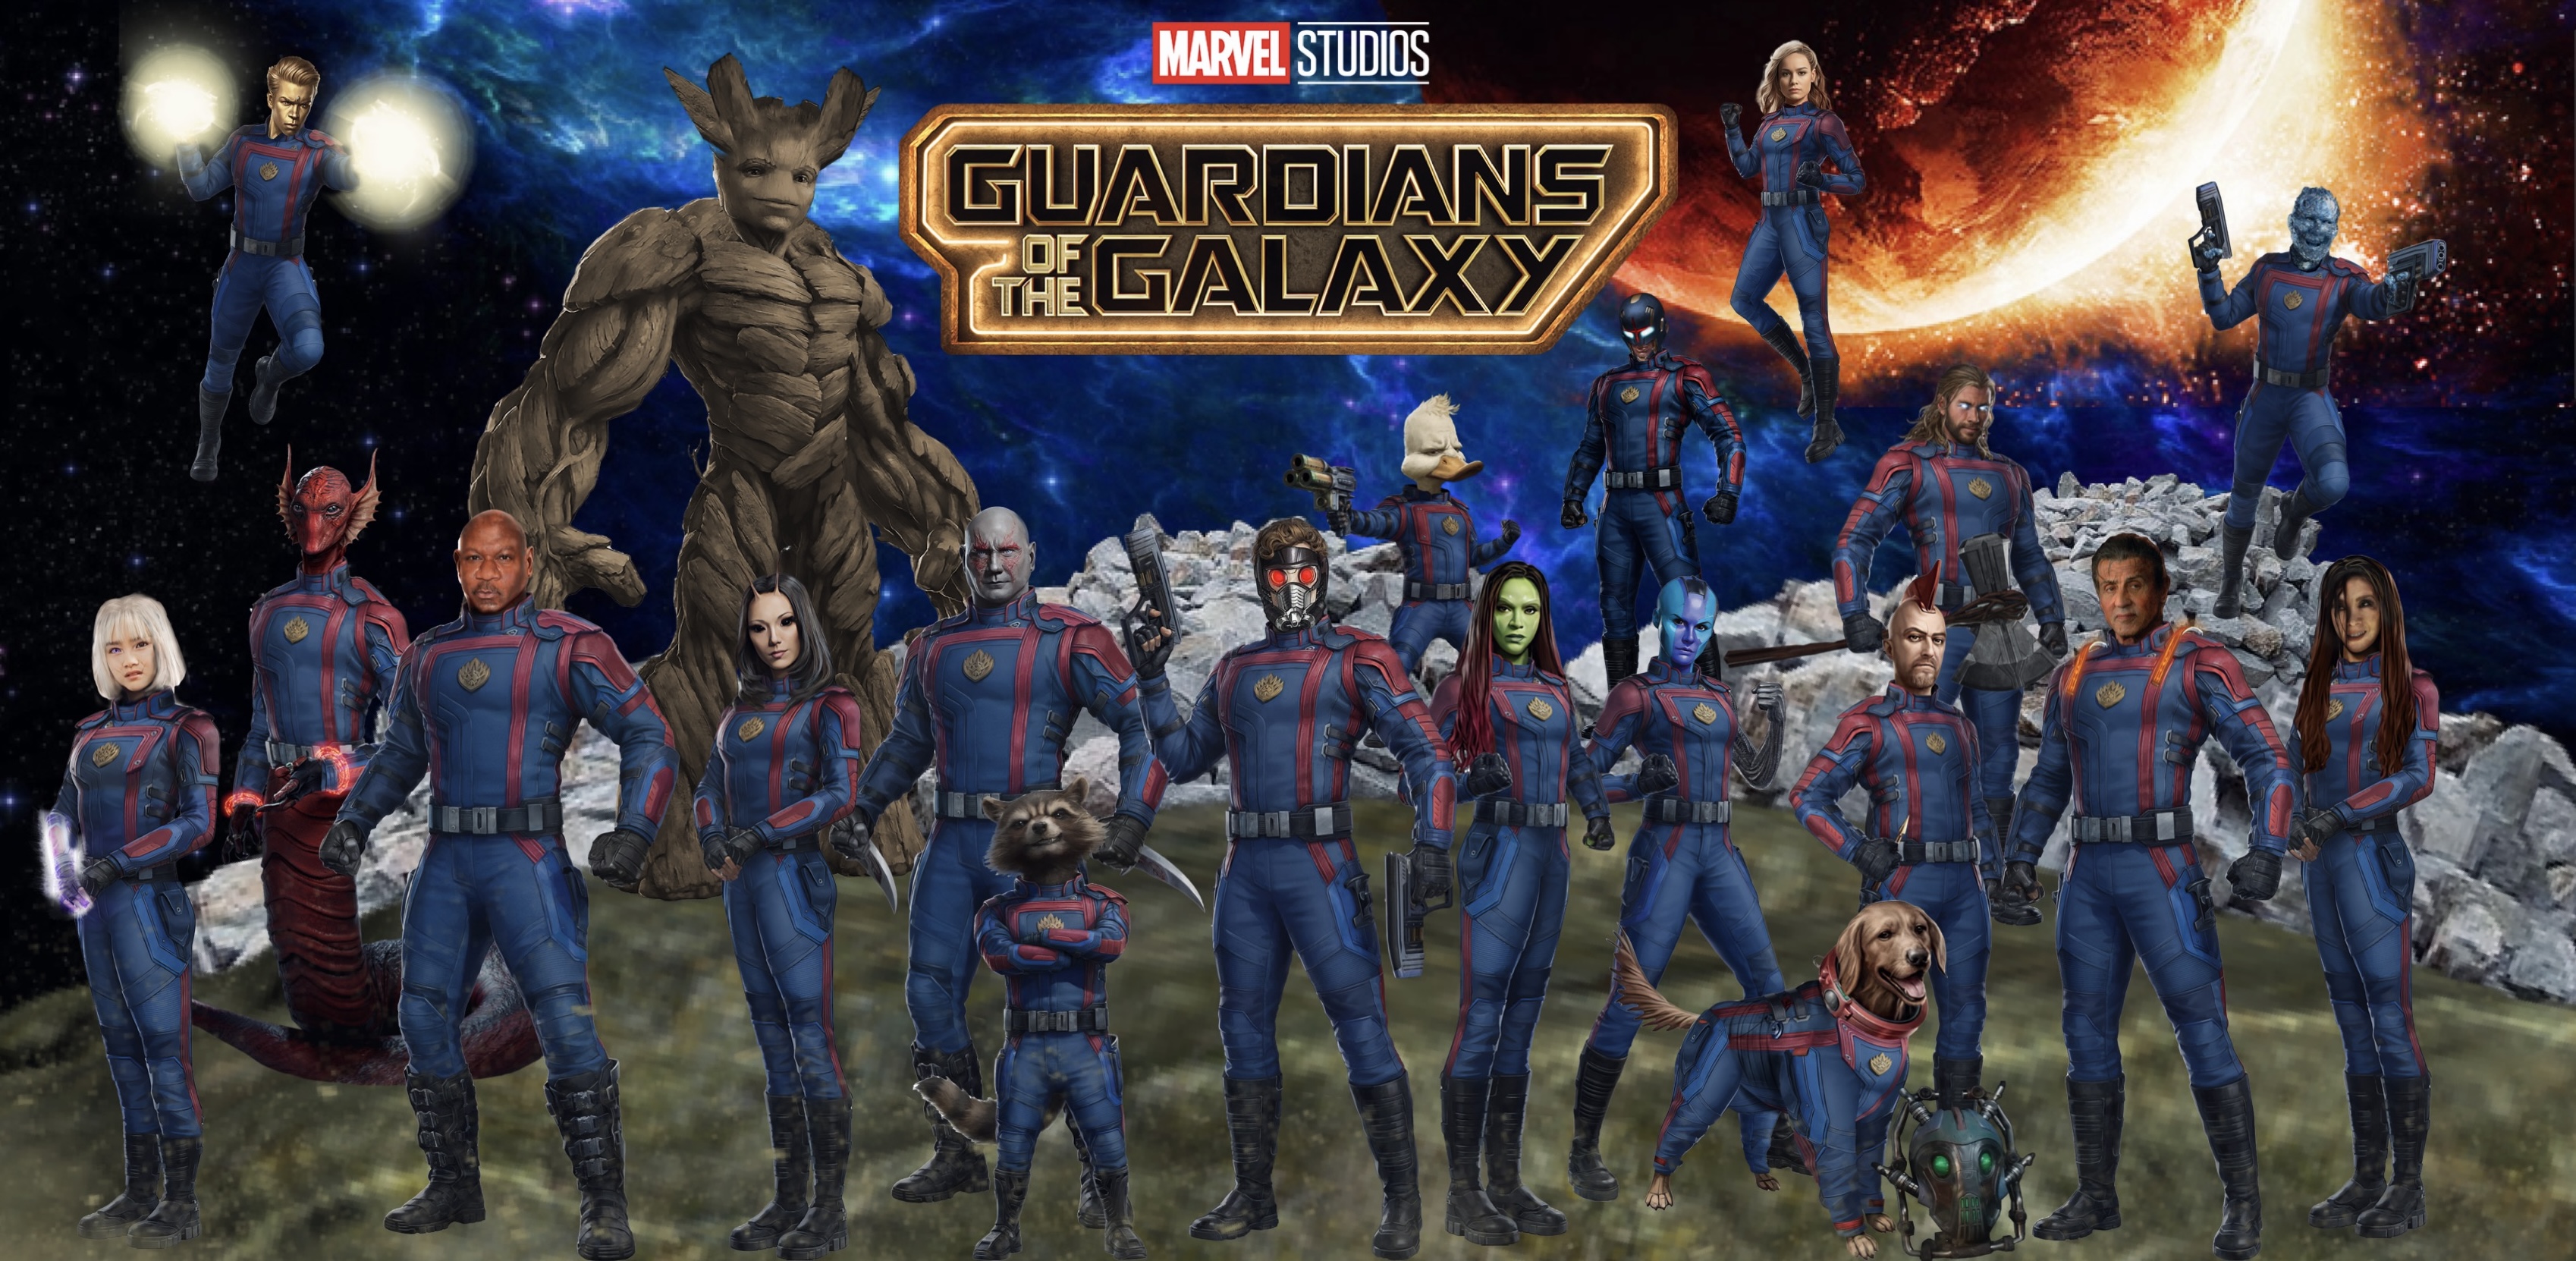 Ultimate Guardians of the Galaxy yourmom420420420 on DeviantArt by